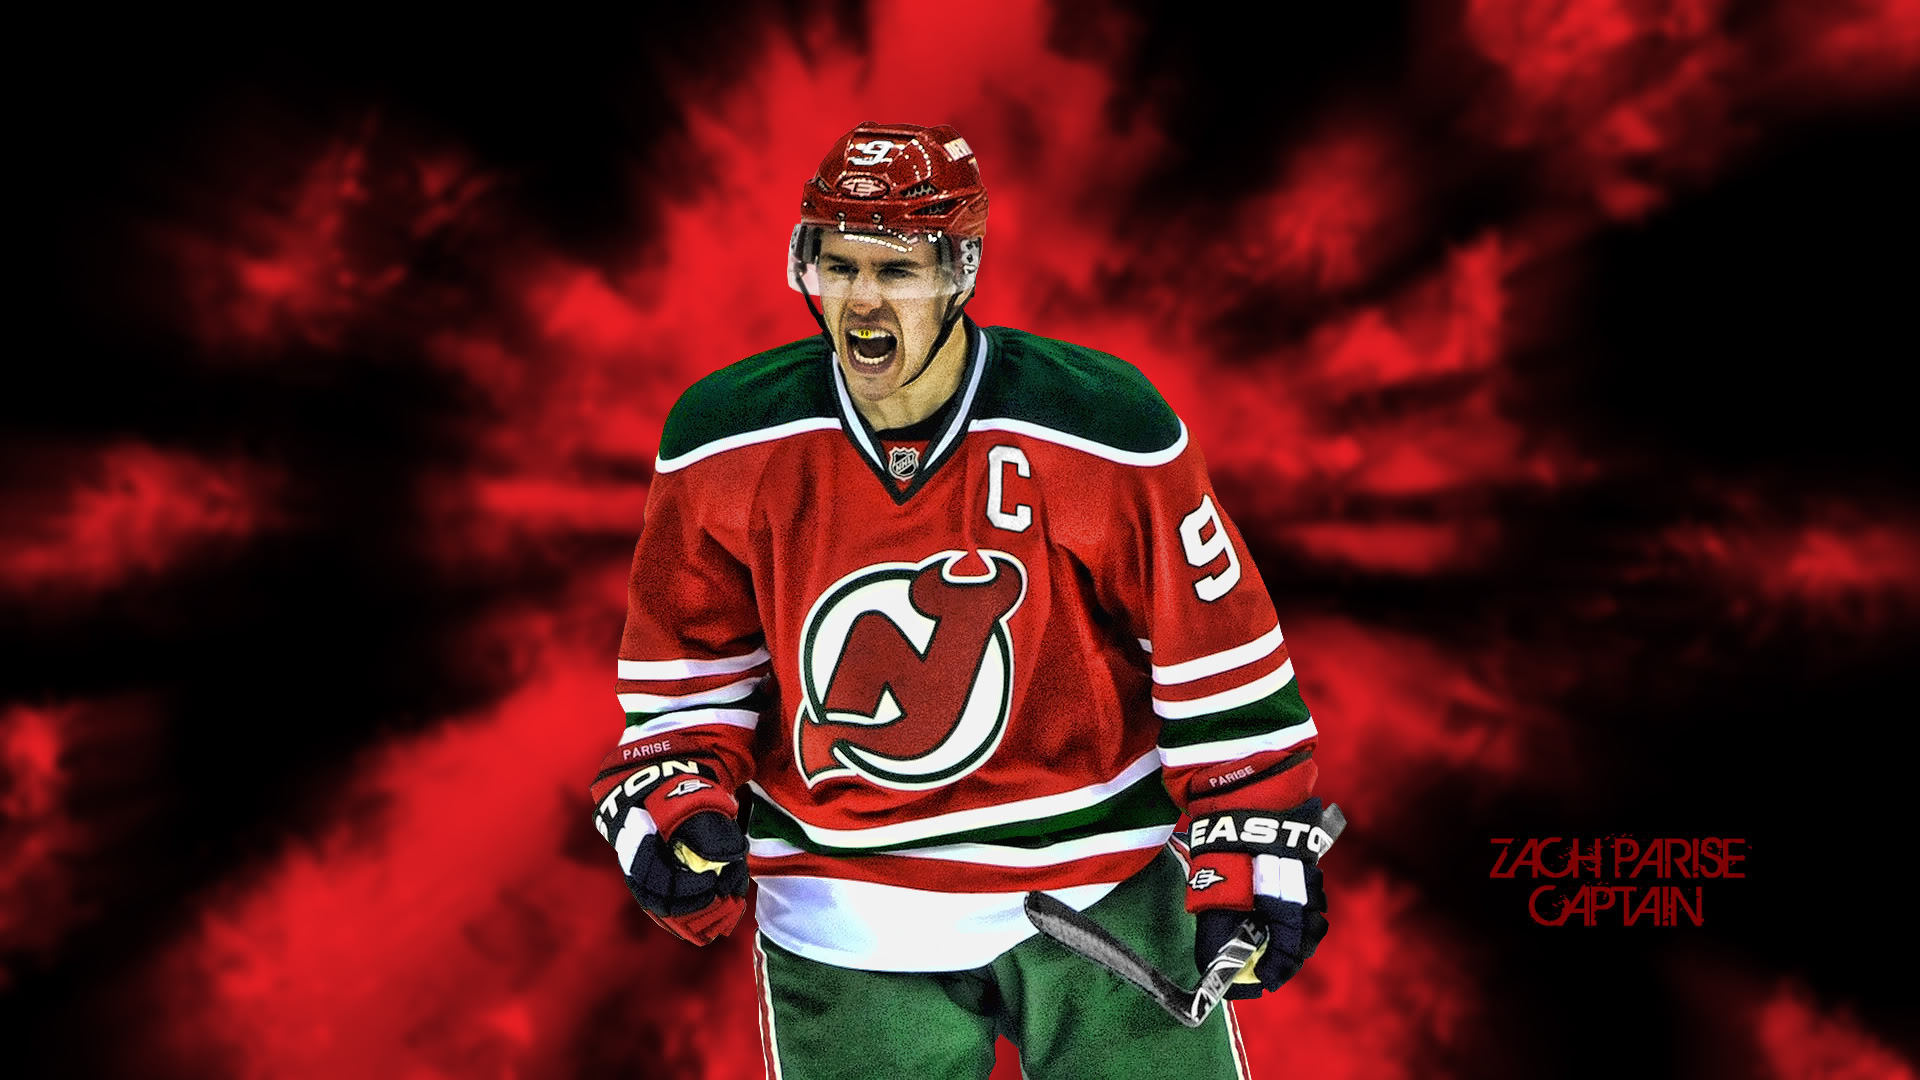 Best Hockey player Minnesota Zach Parise wallpapers and images ...